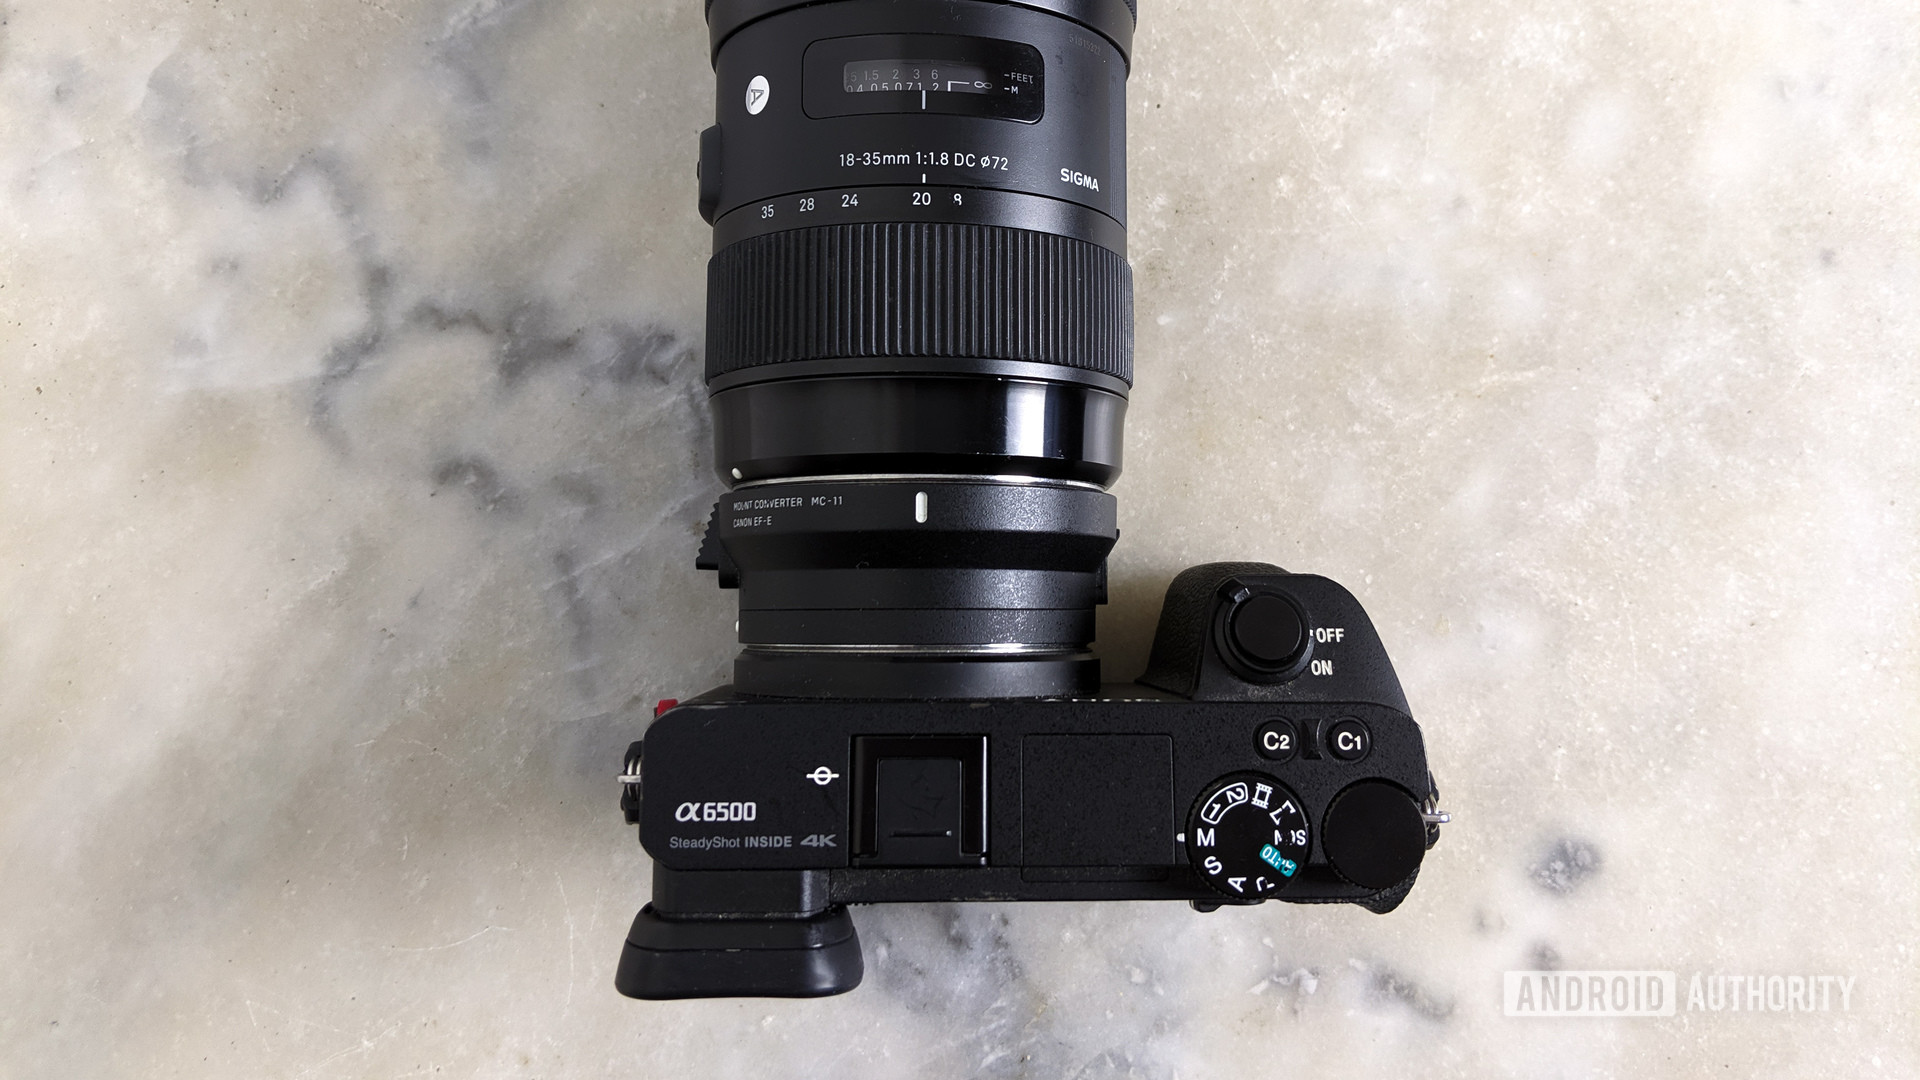 Top-down shot of the Sony a6500 mirrorless camera with a Sigma lens attached